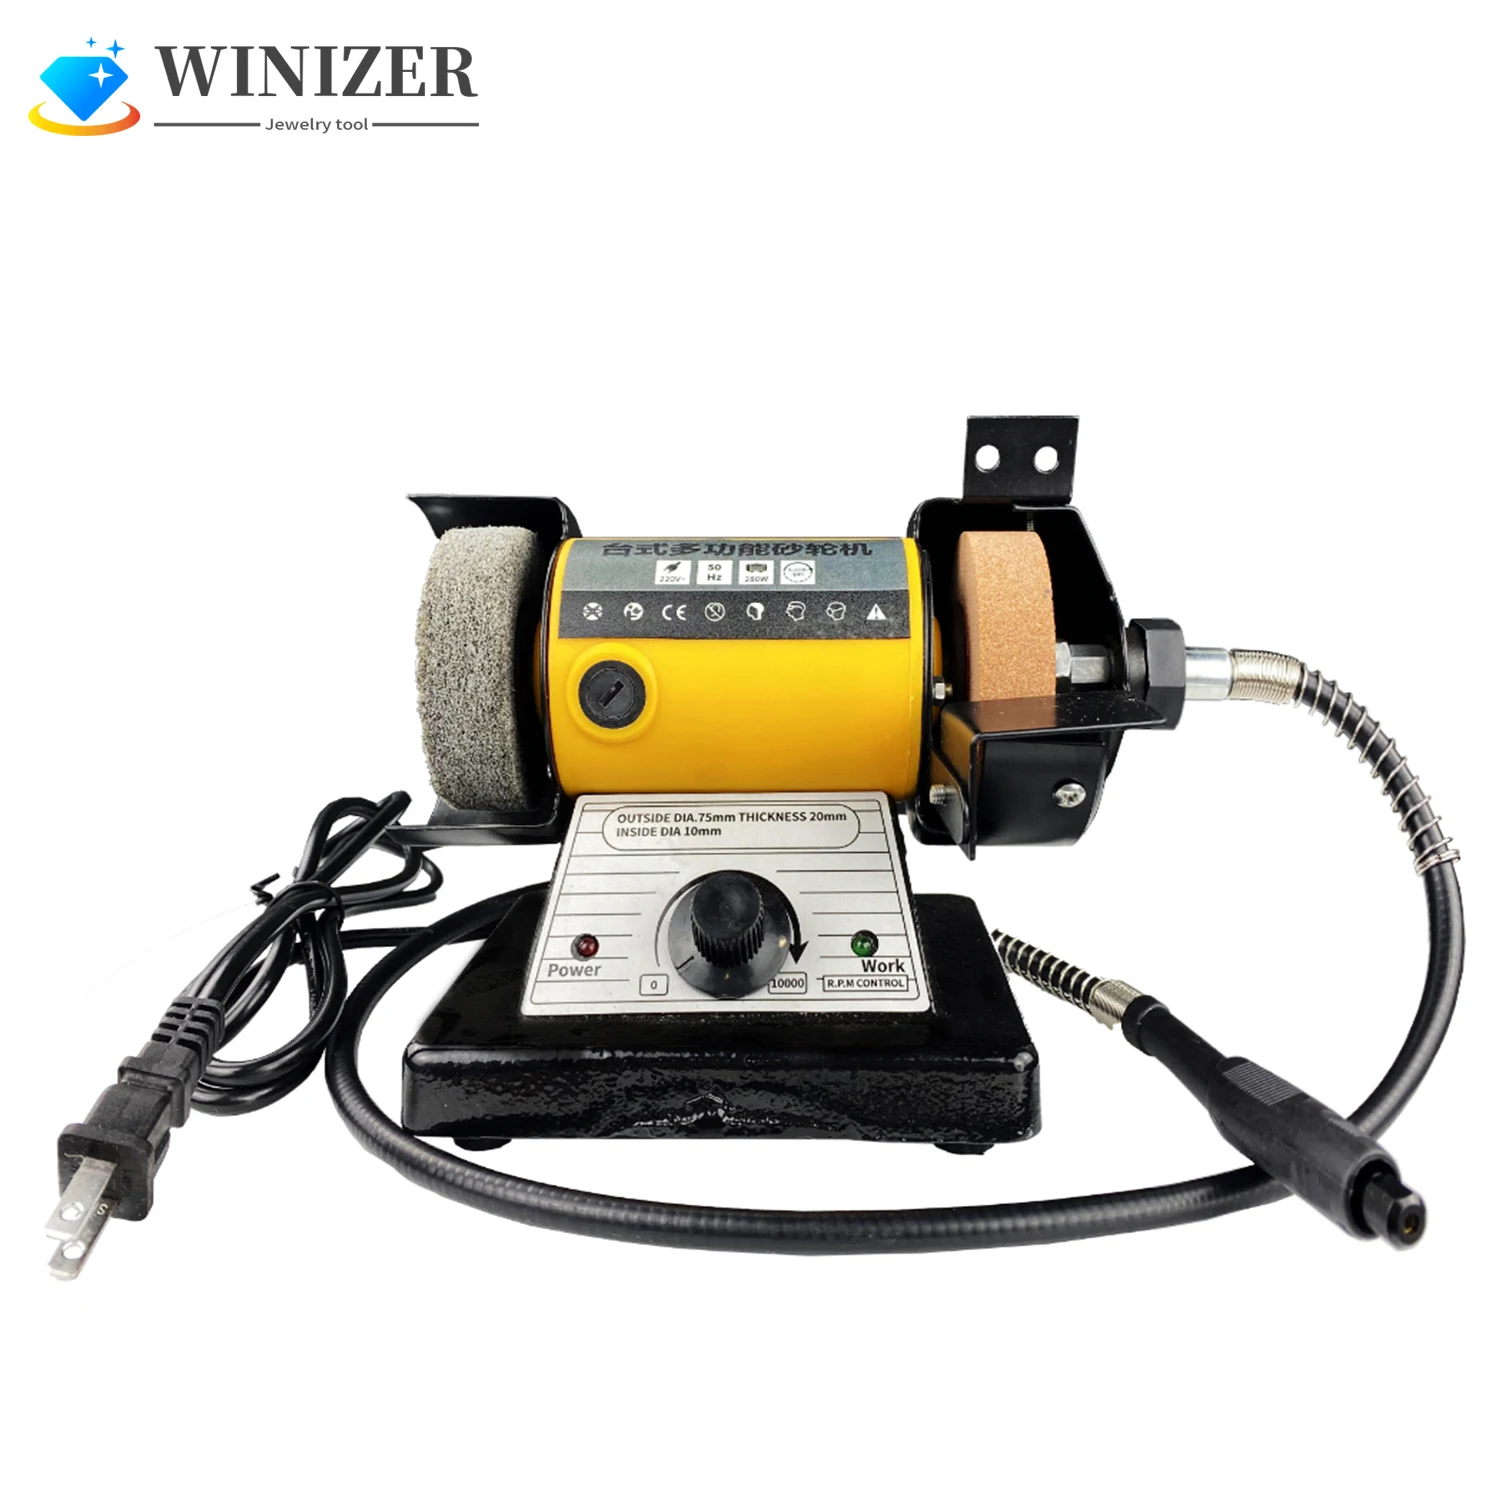 Portable Mini Bench Grinder and Polisher with Flexible Shaft and Accessories 280w 0-10000 RPM Jewelry Hobby DIY Engraving  Tools